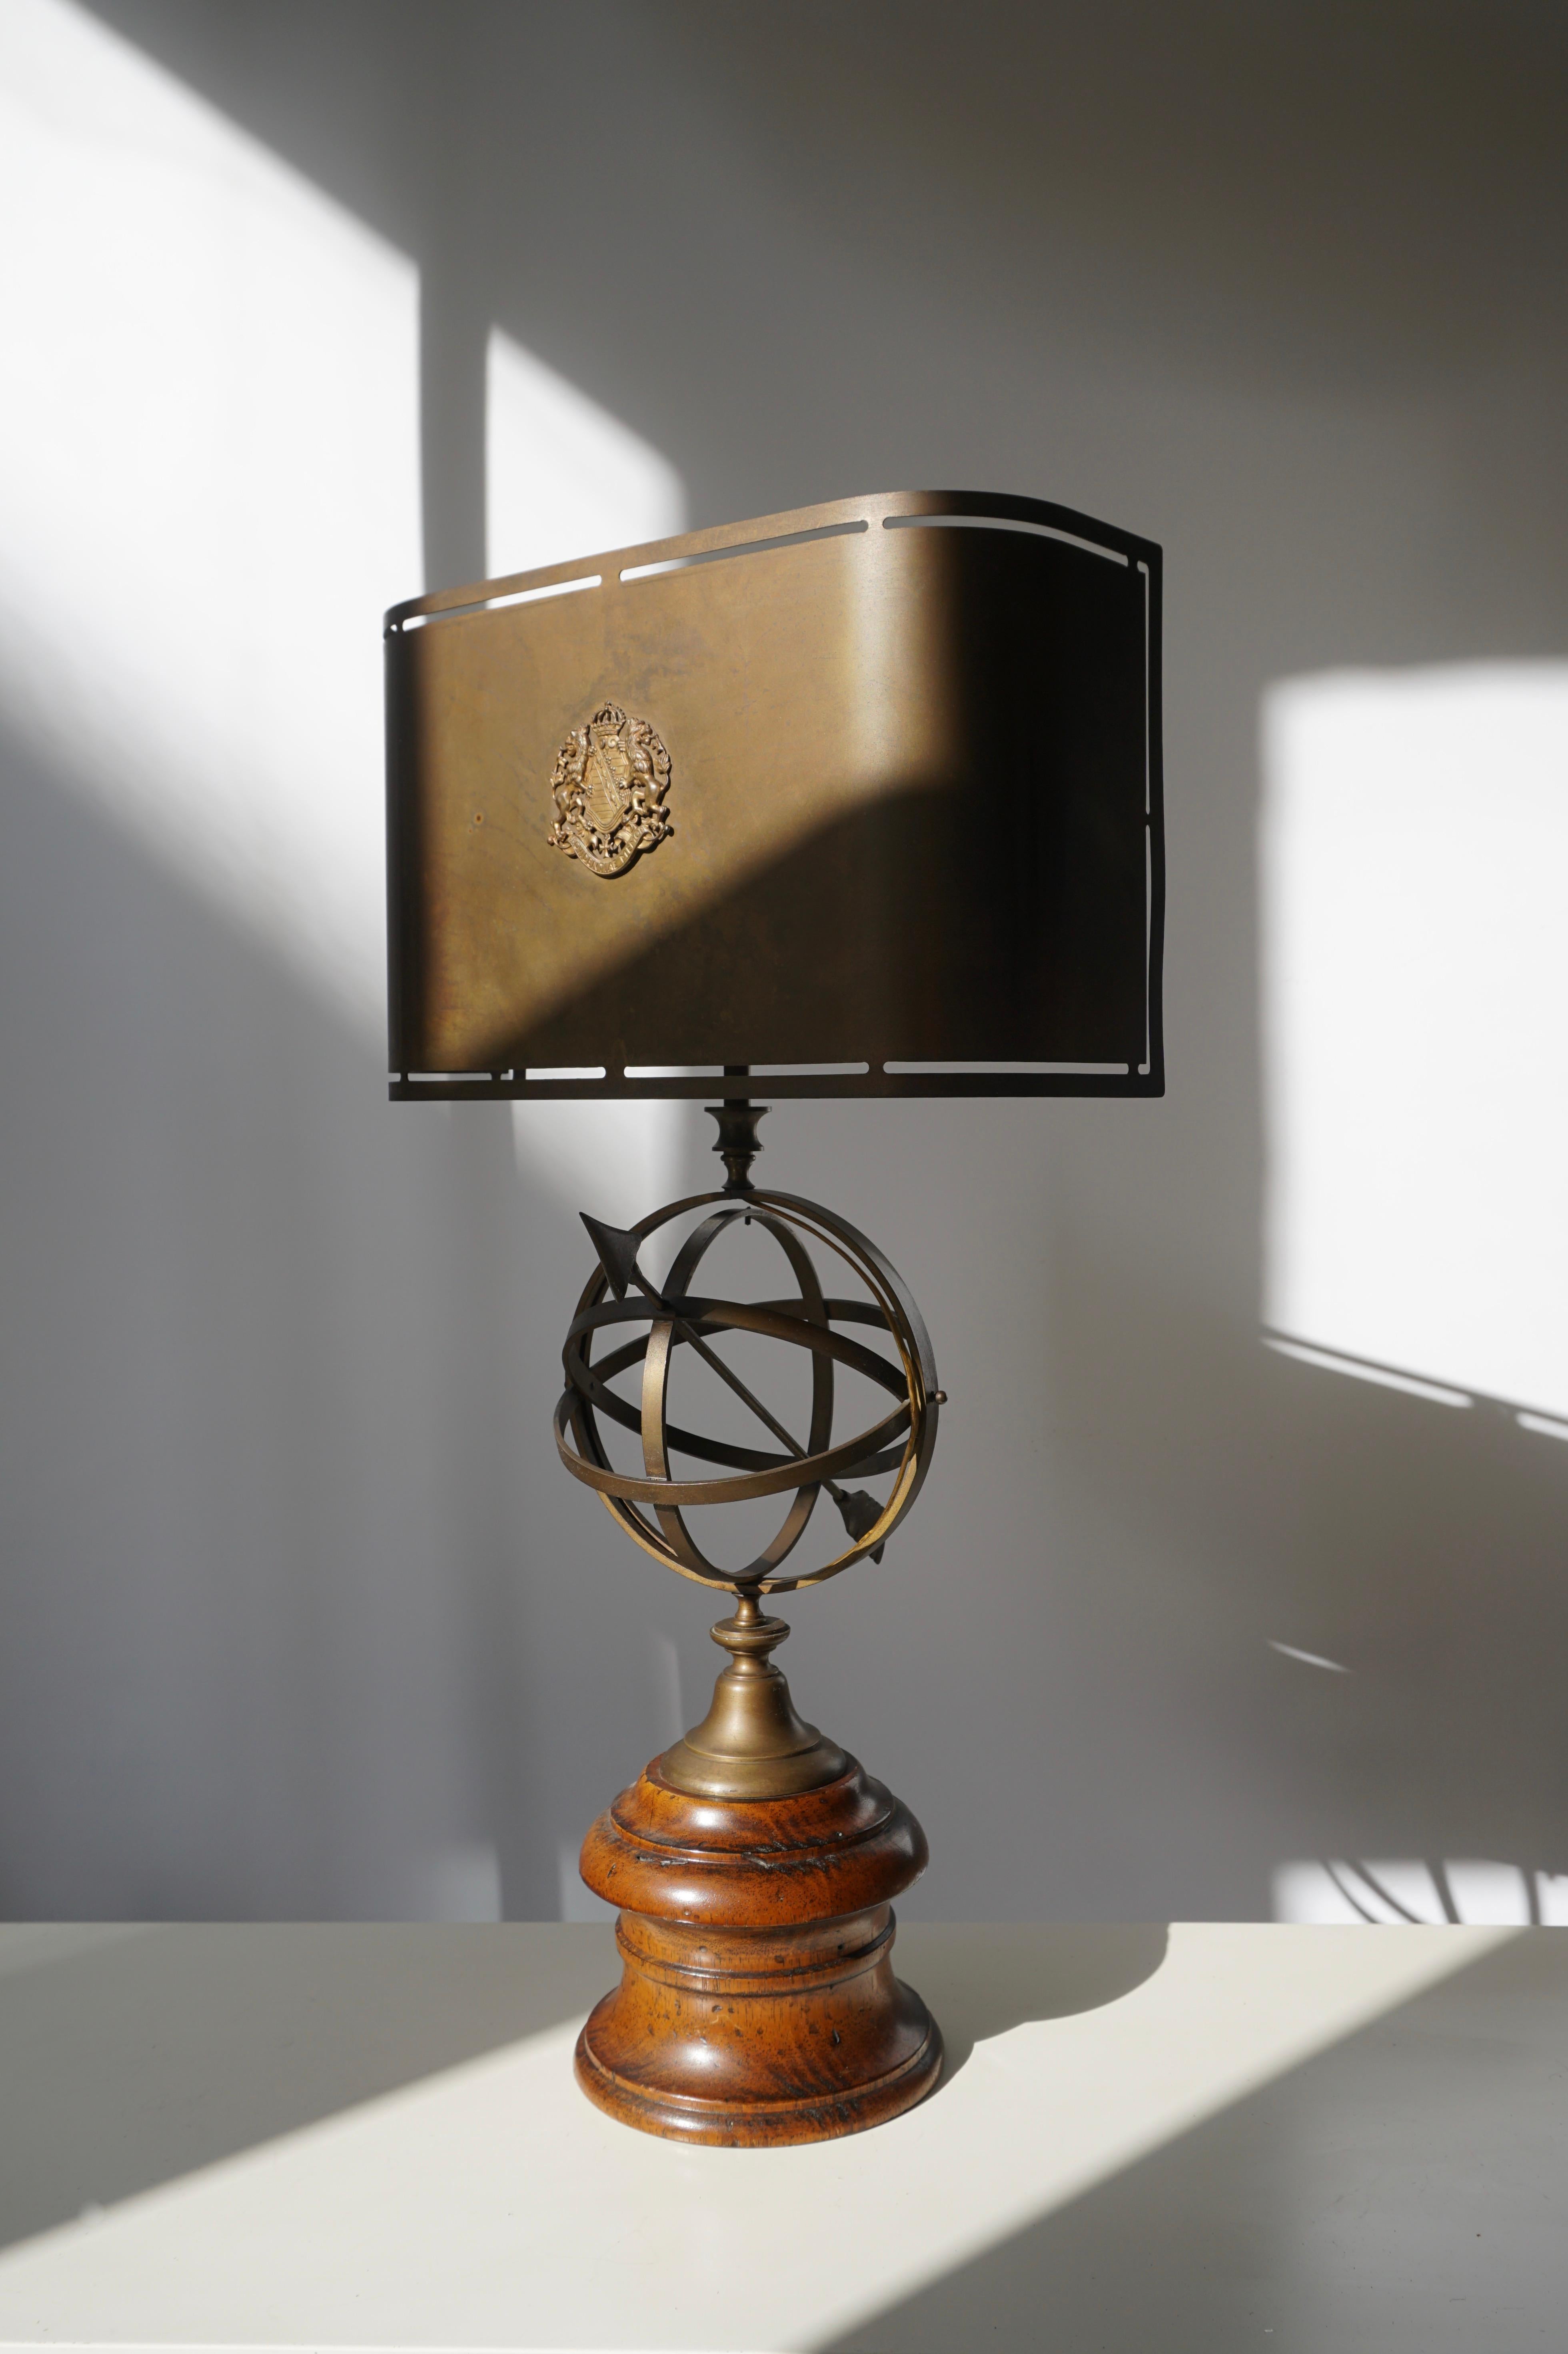 Vintage table lamp with a wooden base and centre in solid brass with a sundial. The shade which is original is also made of patinated brass. Has room for two standard E27 bulbs. Gives a warm glow when lit.
Measures: Height 65 cm.
Width 36